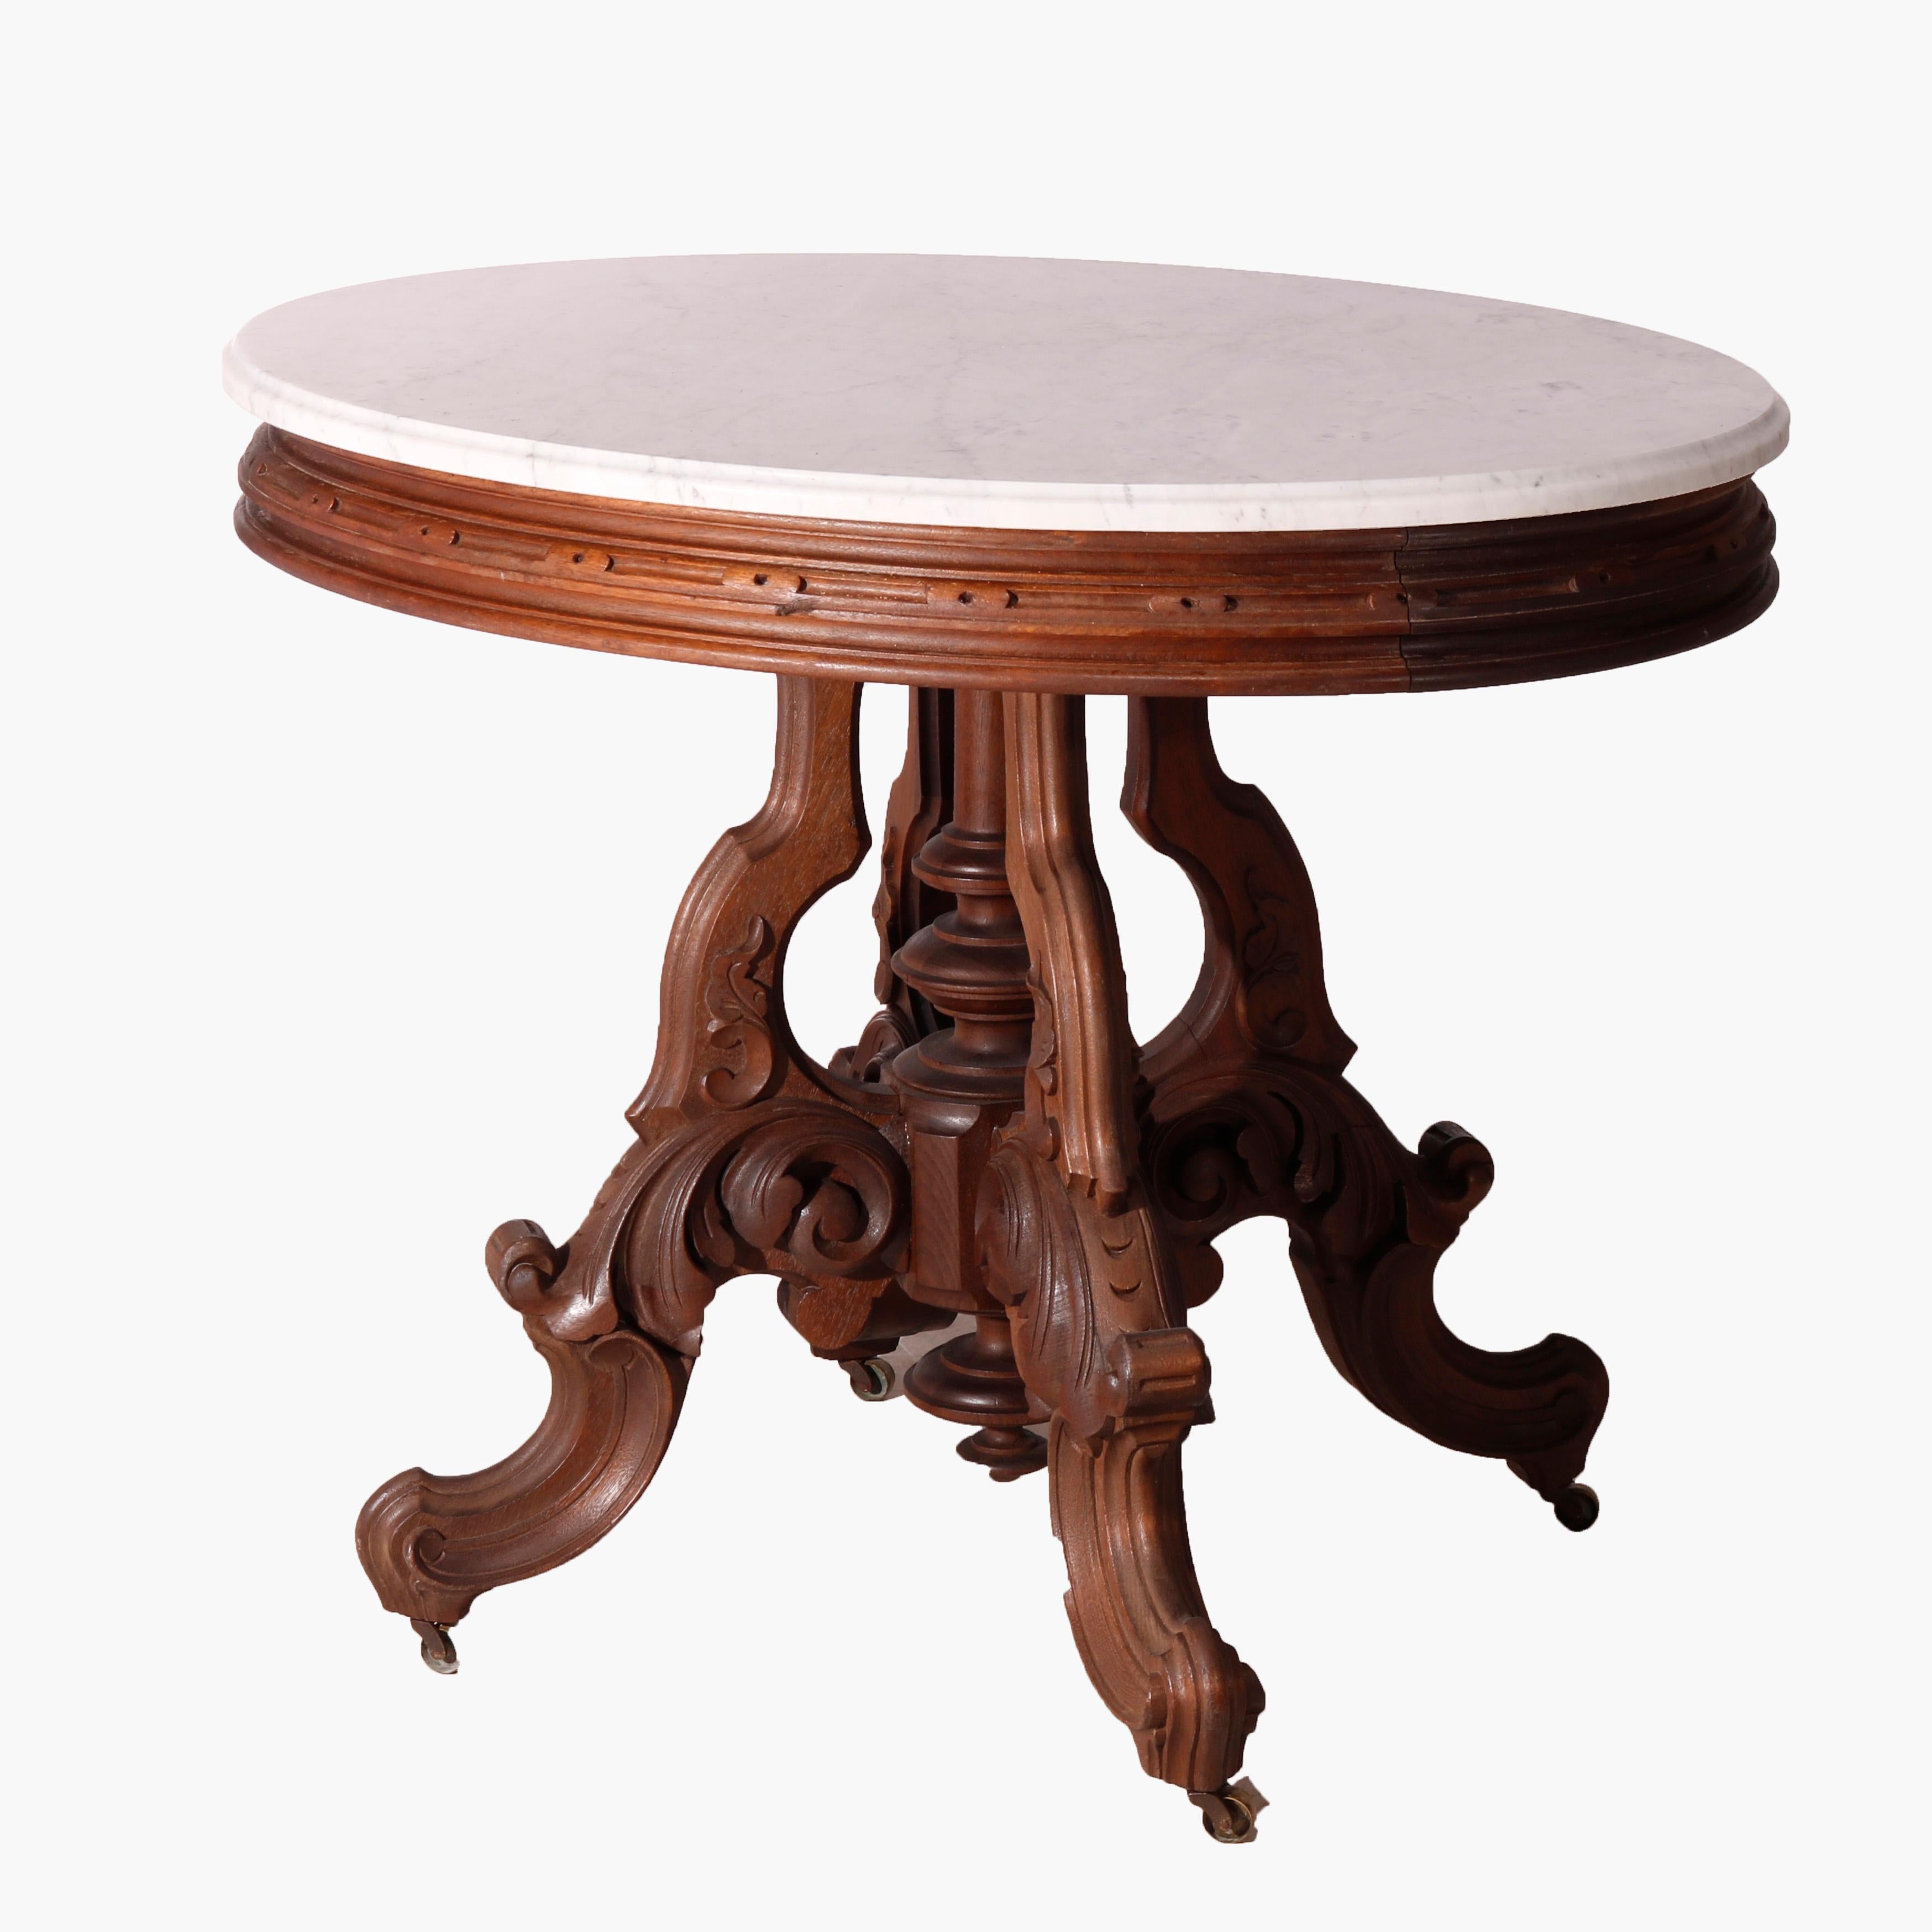 An antique Victorian Brooks parlor table offers beveled marble surmounting a carved walnut base raised on stylized scroll and foliate form legs, circa 1890

Measures - 30